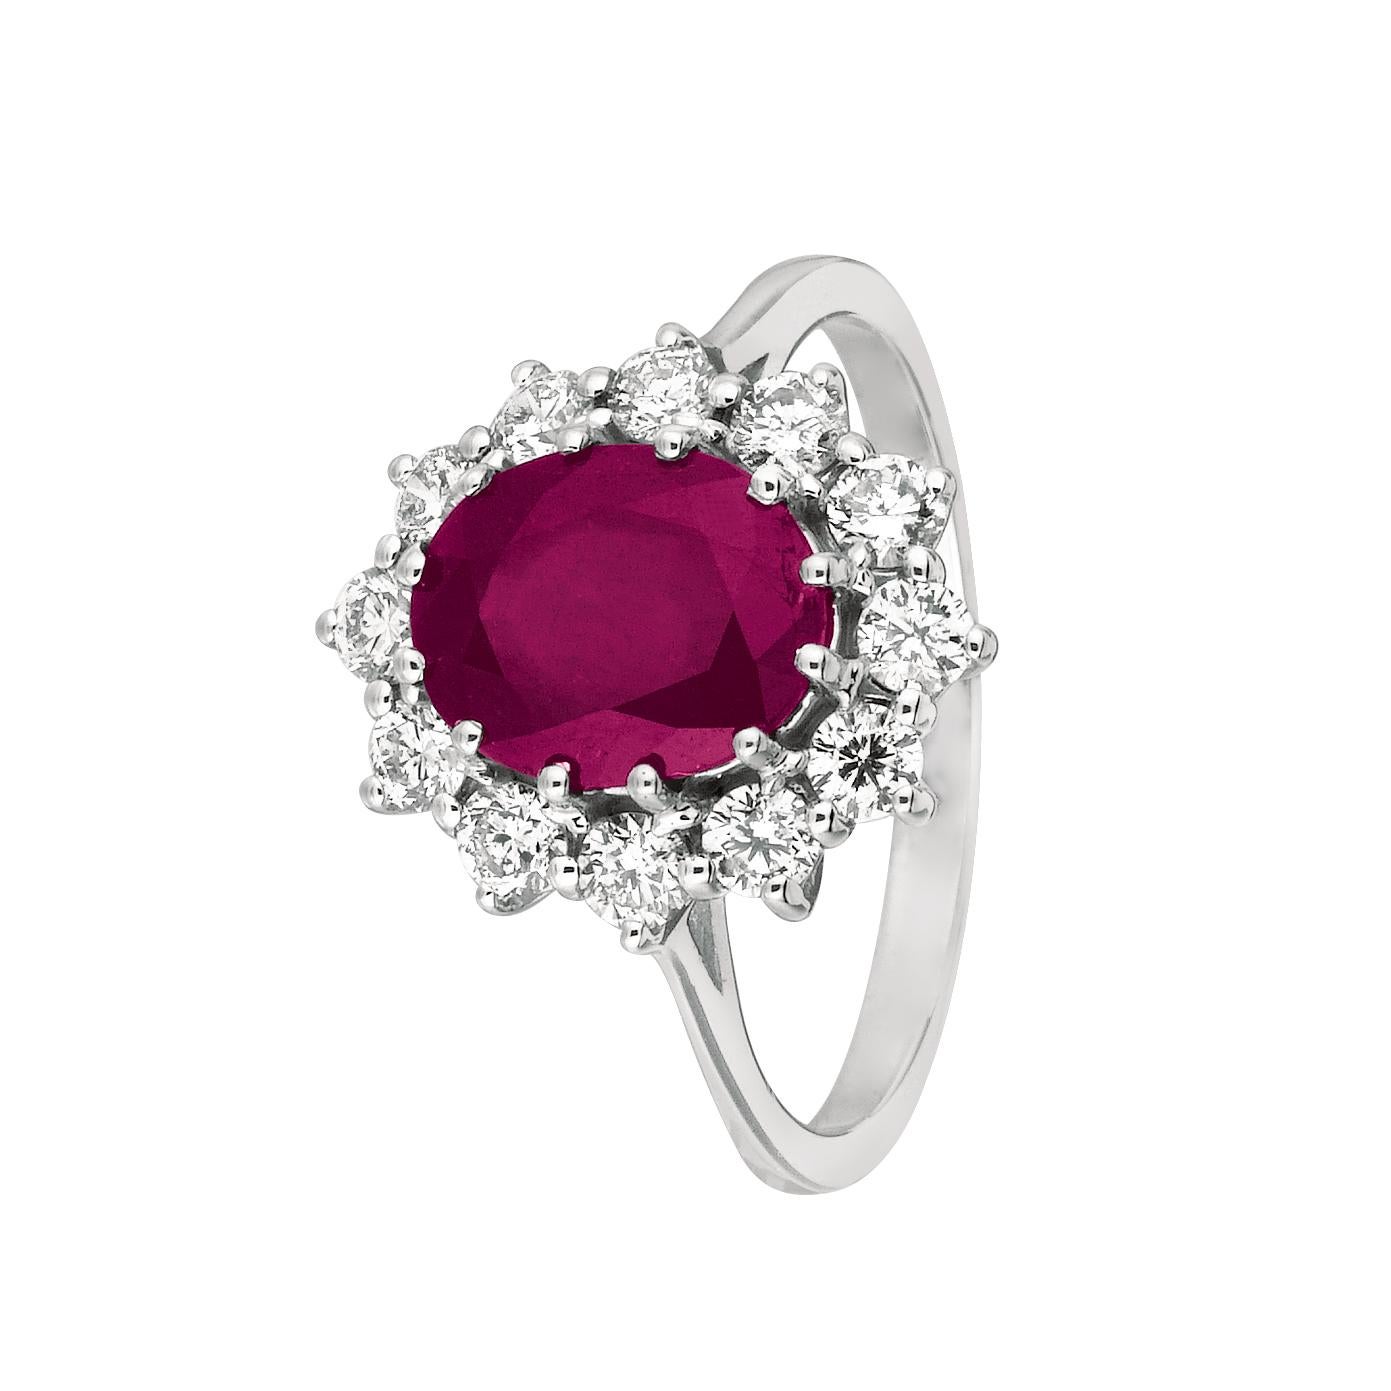 Princess Diana Style 3.50 Carat Natural Diamond and Ruby Oval Ring G SI 14K White Gold

    100% Natural Diamonds and Ruby
    3.50CTW
    Diamond Color G-H 
    Diamond Clarity SI  
    14K White Gold  Prong style,   3.70 grams
    9/16 inch in